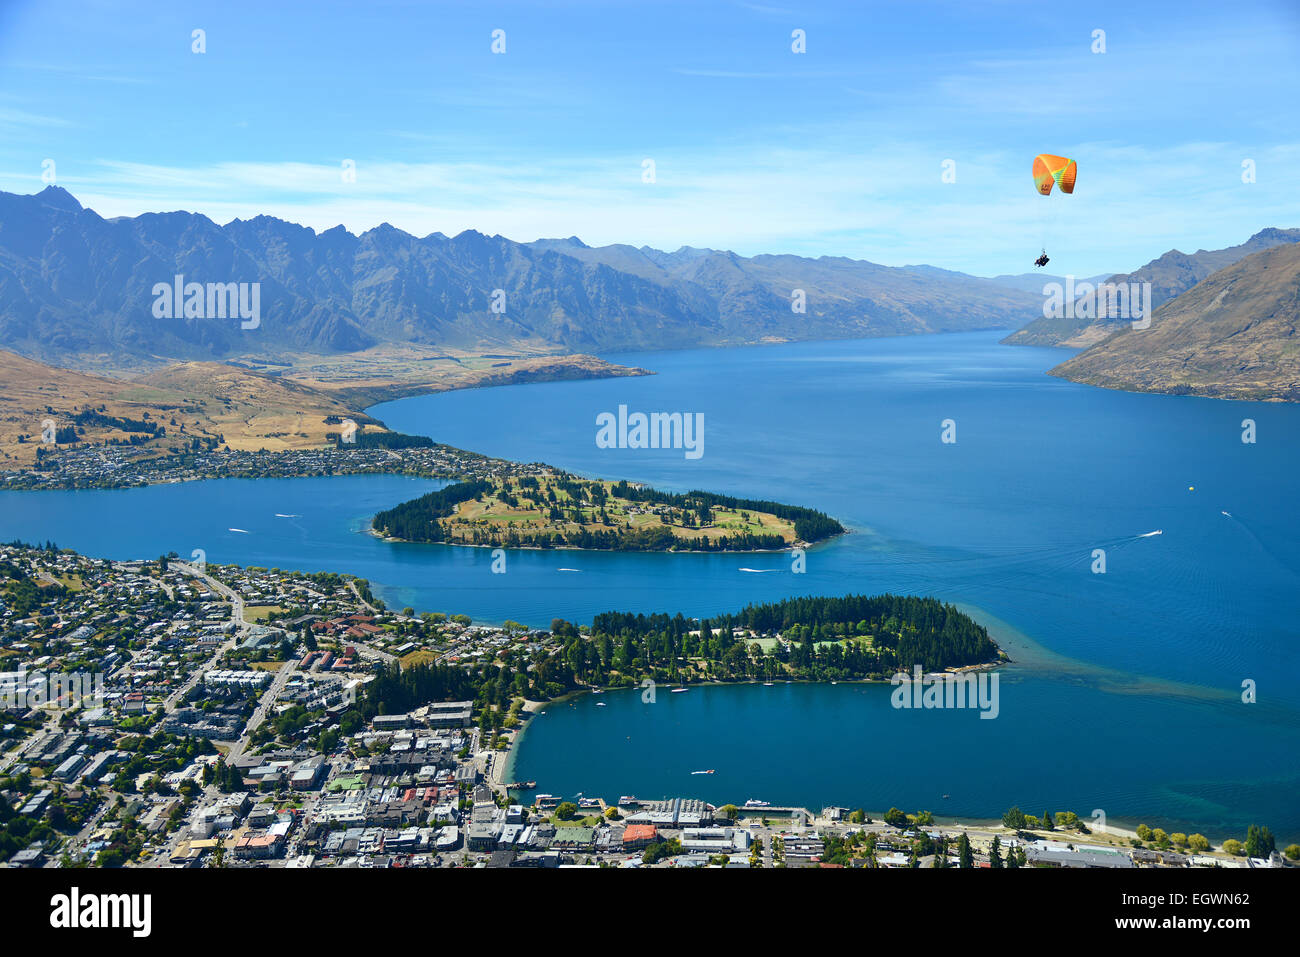 Tandem Paragliding over Queenstown (adventure capital of the World), on the shores of Lake Wakatipu, South Island, New Zealand. Stock Photo